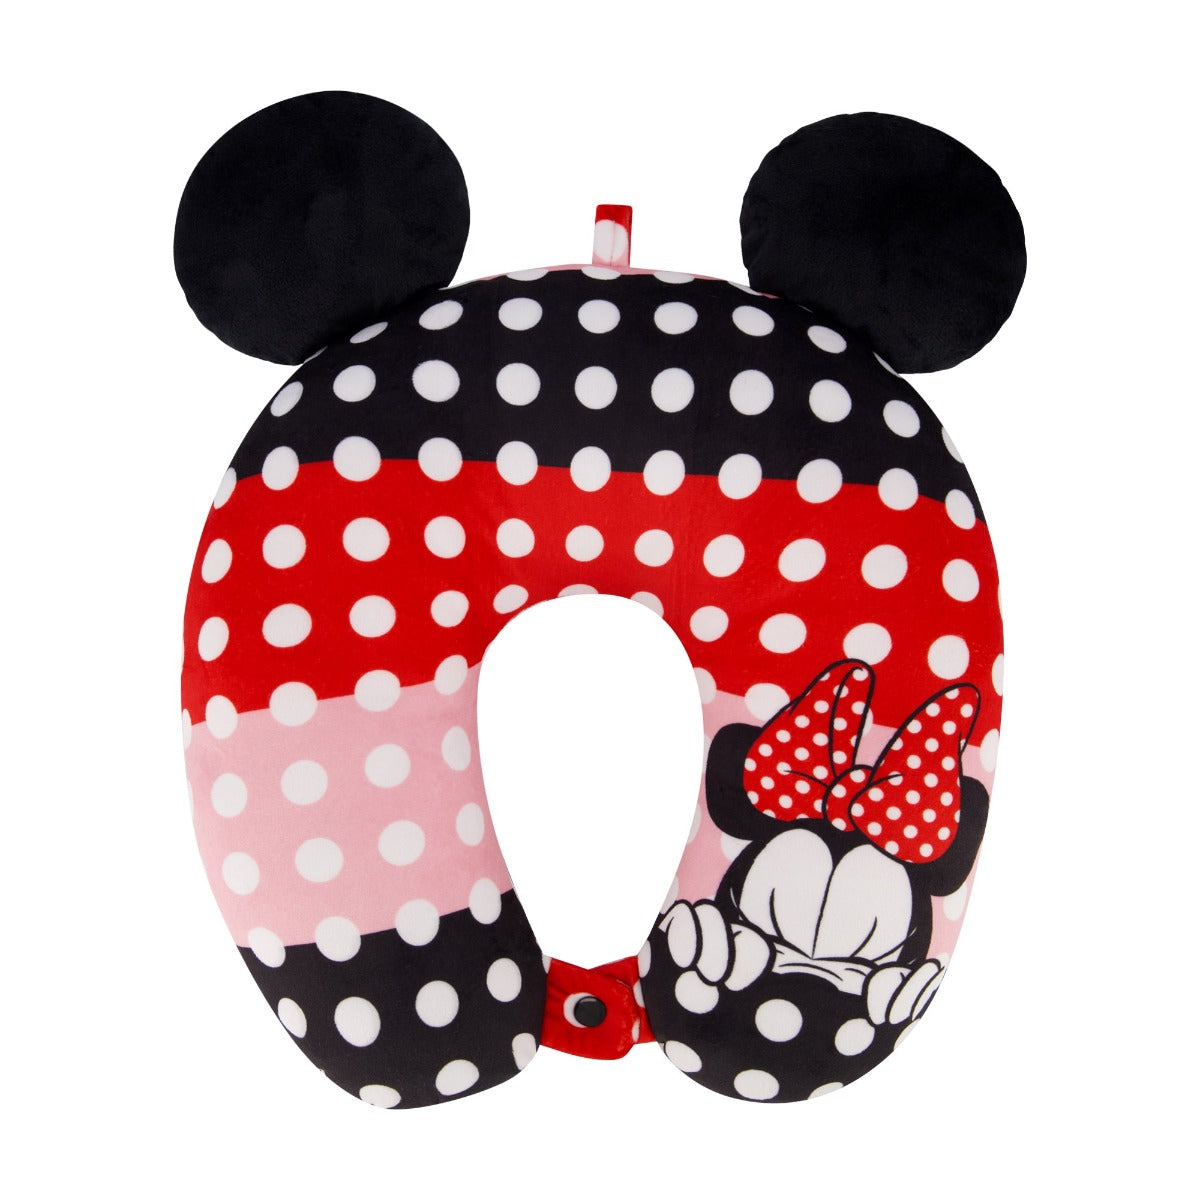 Ful disney minnie mouse three color polka dot ears neck pillow red black pink - best comfortable traveling neck pillows for kids and adults